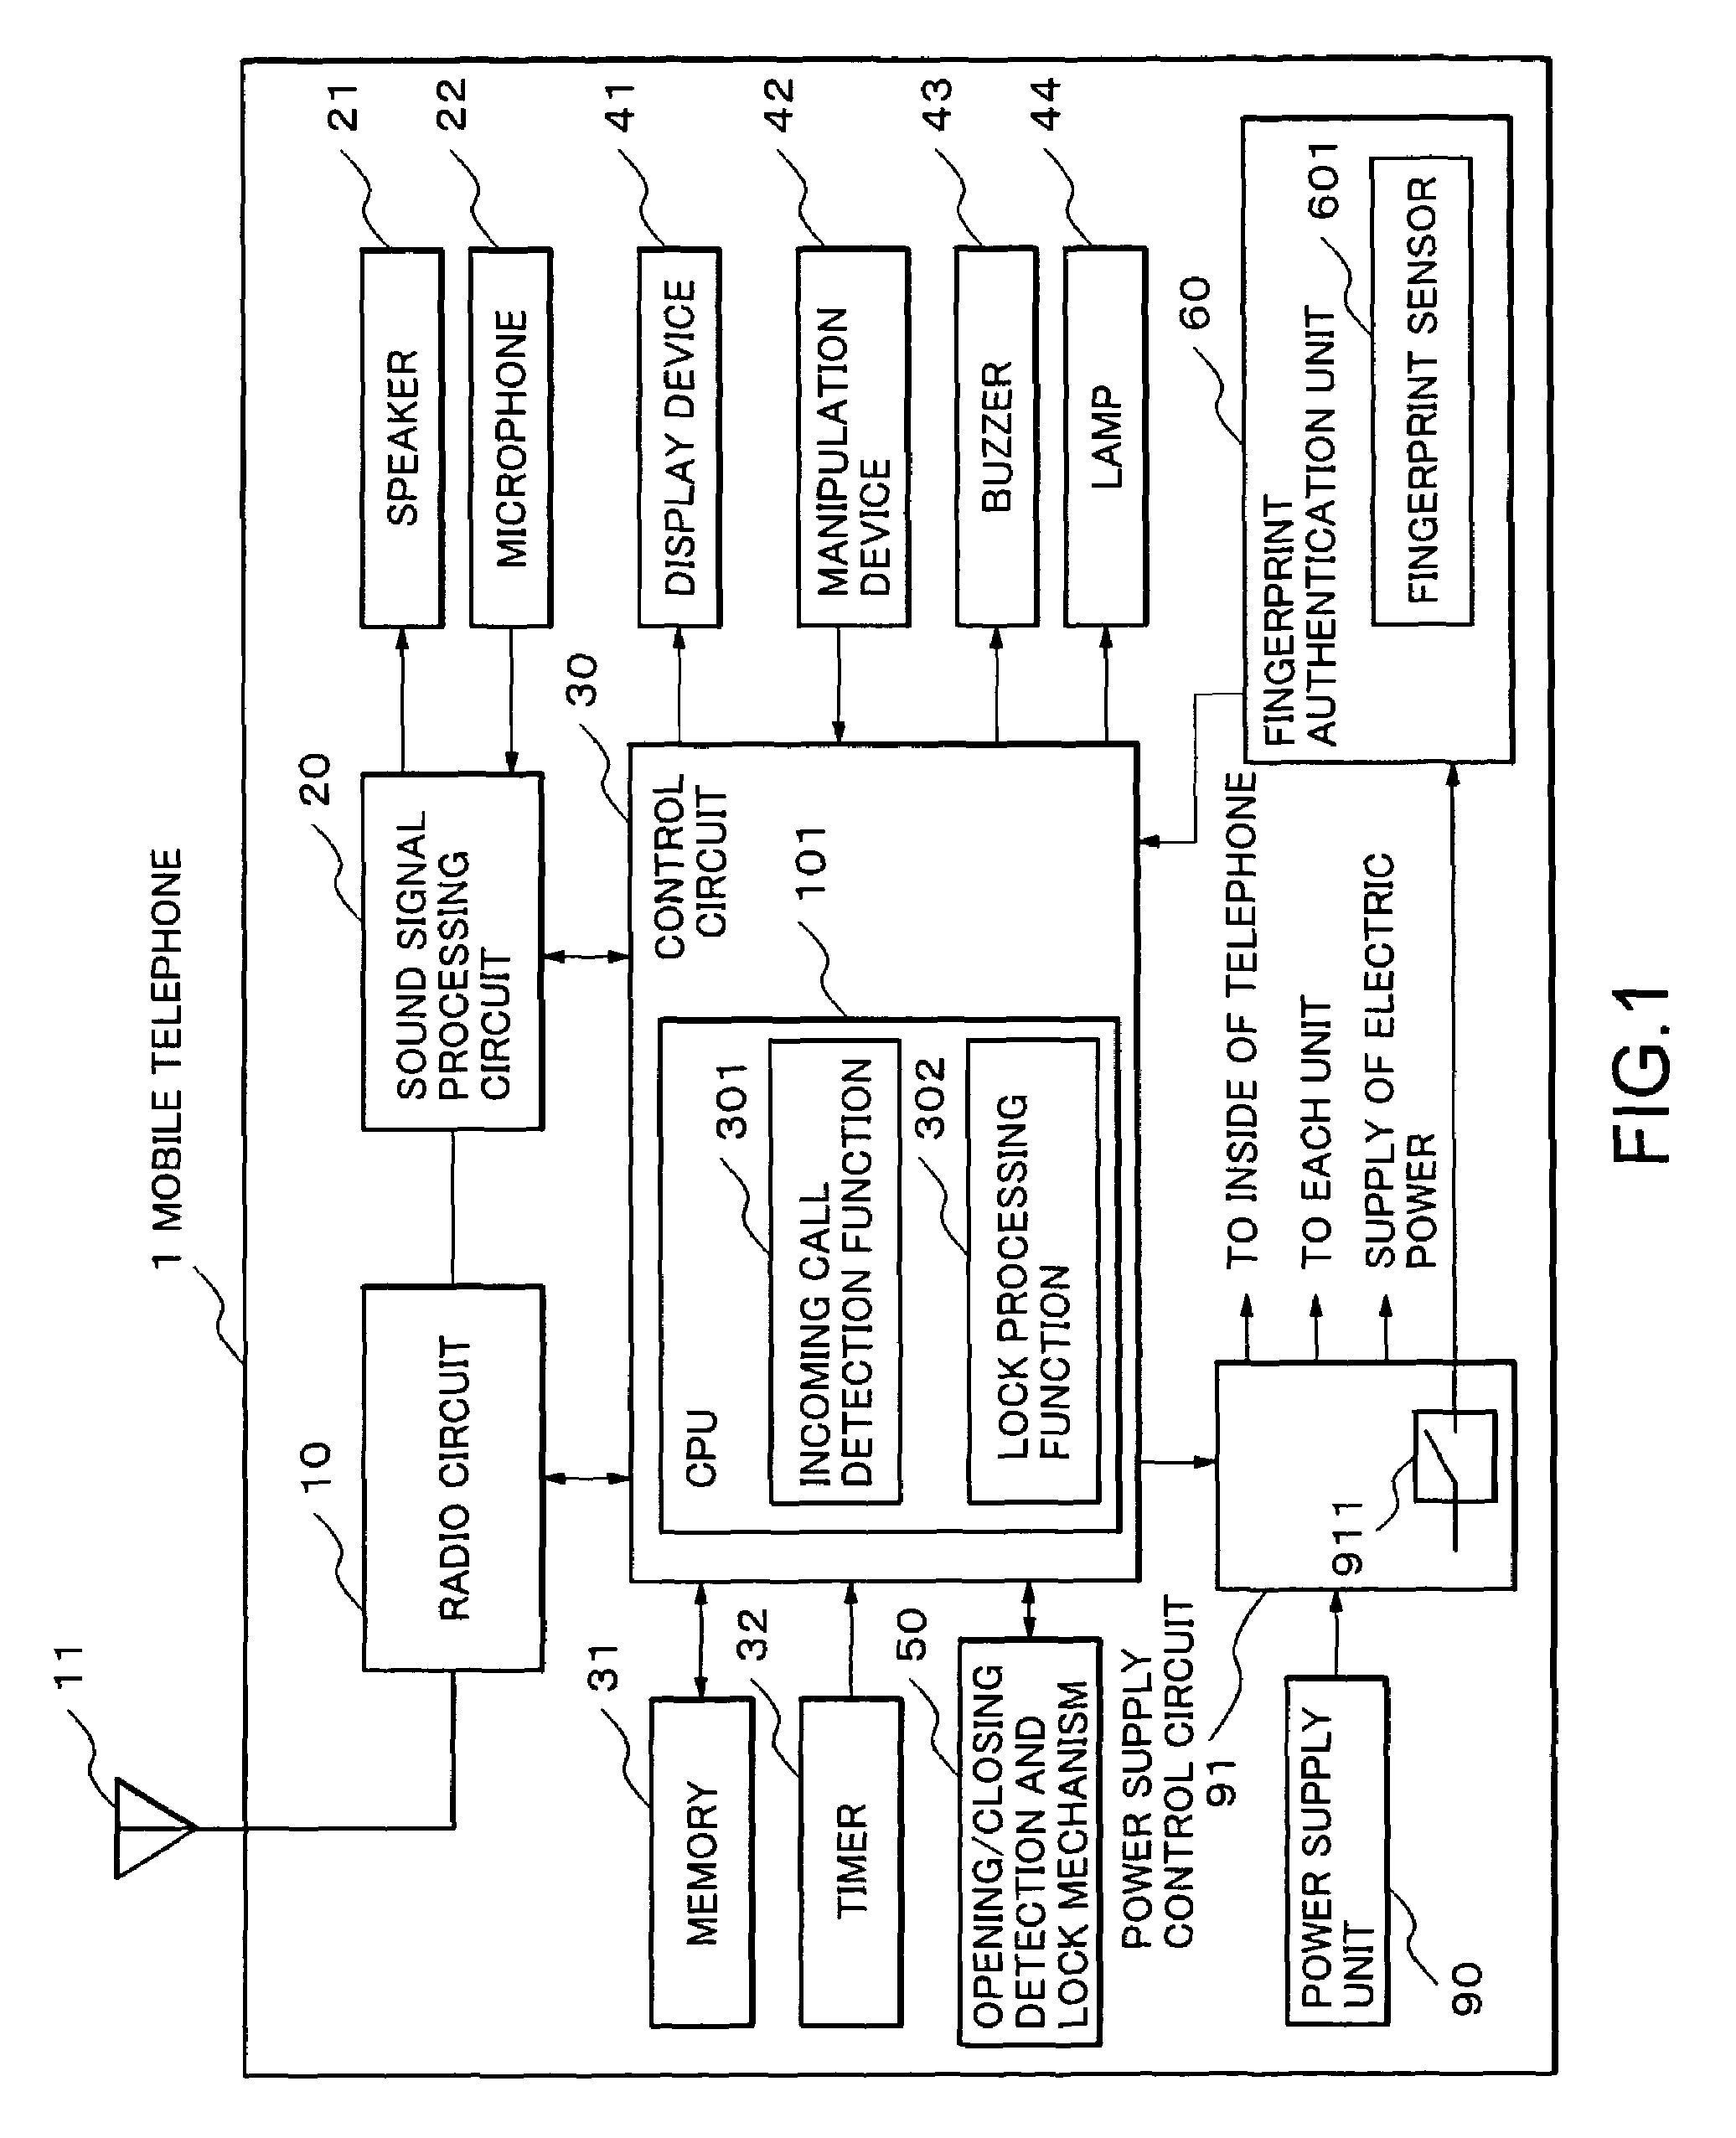 Mobile terminal, method of controlling the same, and computer program of the same